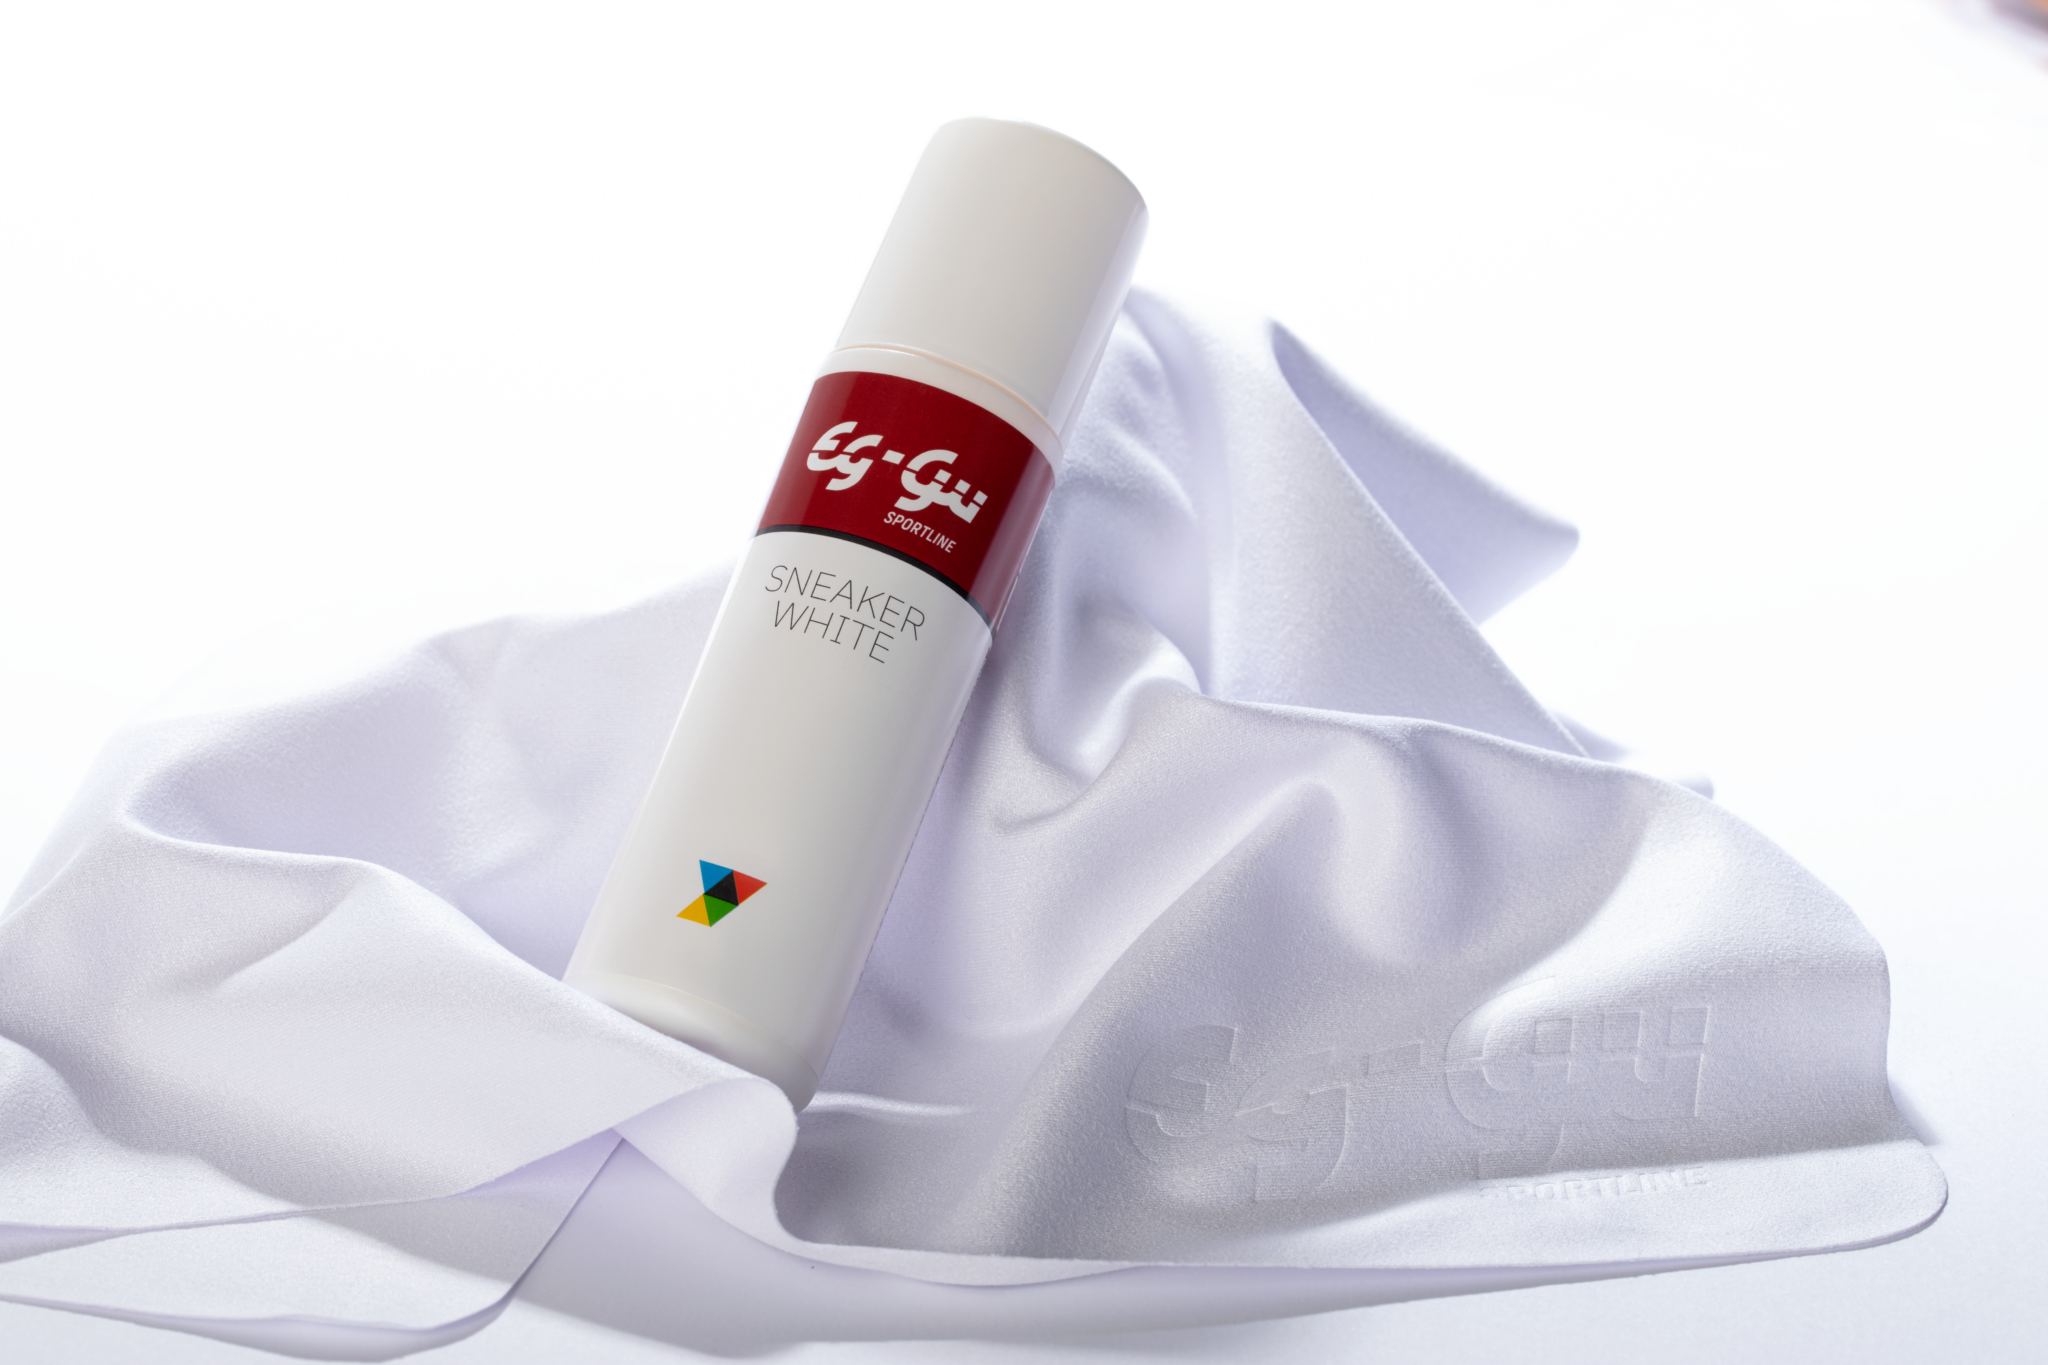 Spray bottle on a shoe cleaning cloth